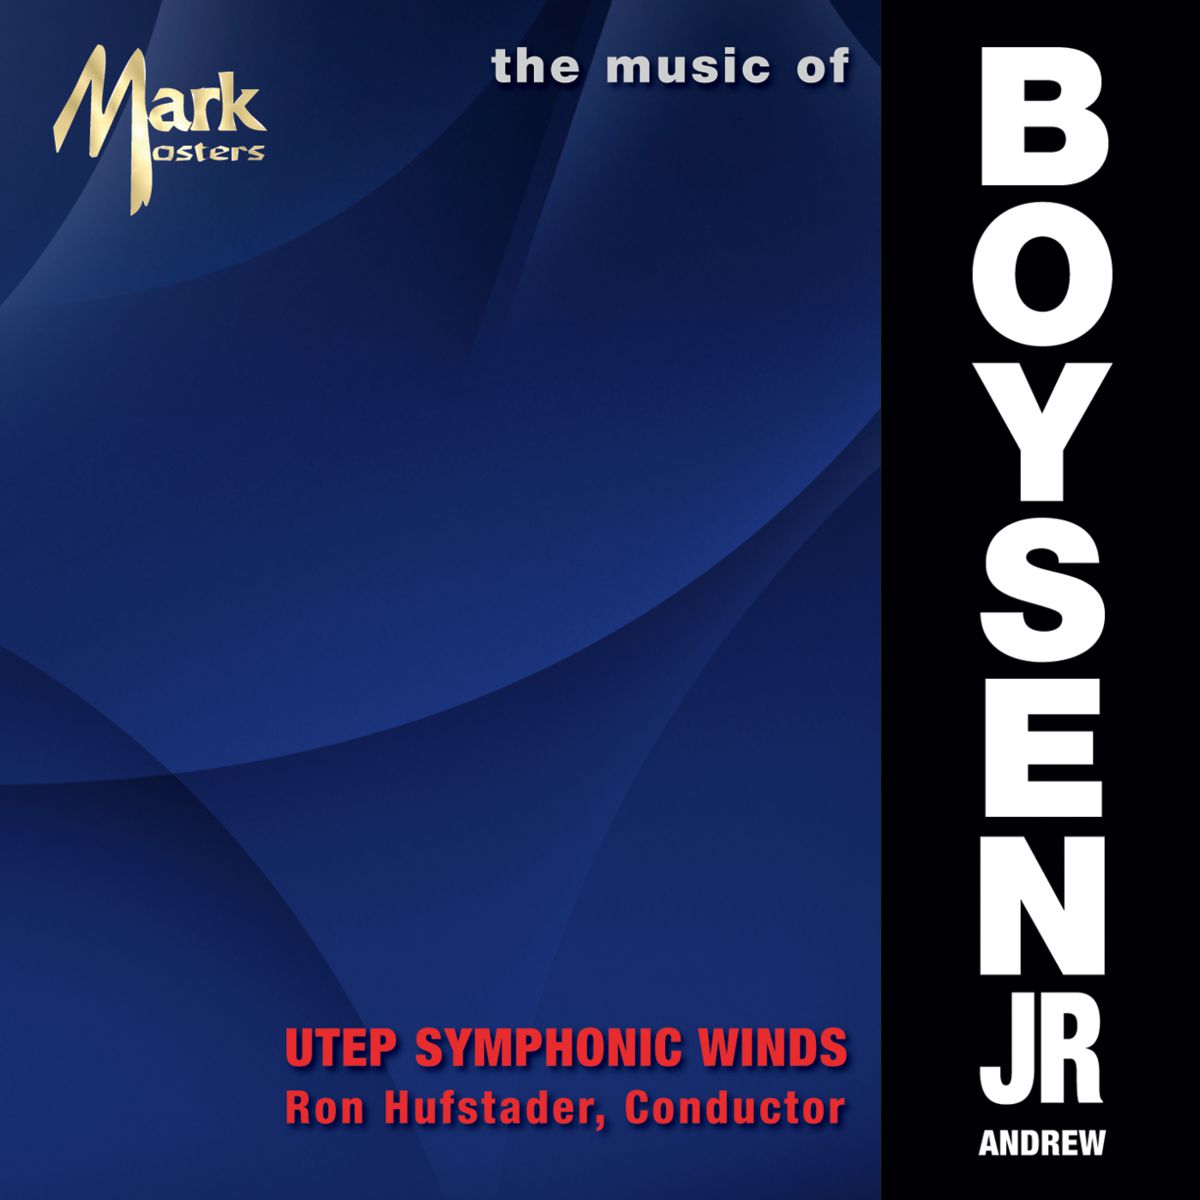 Music of Andrew Boysen Jr., The - click here